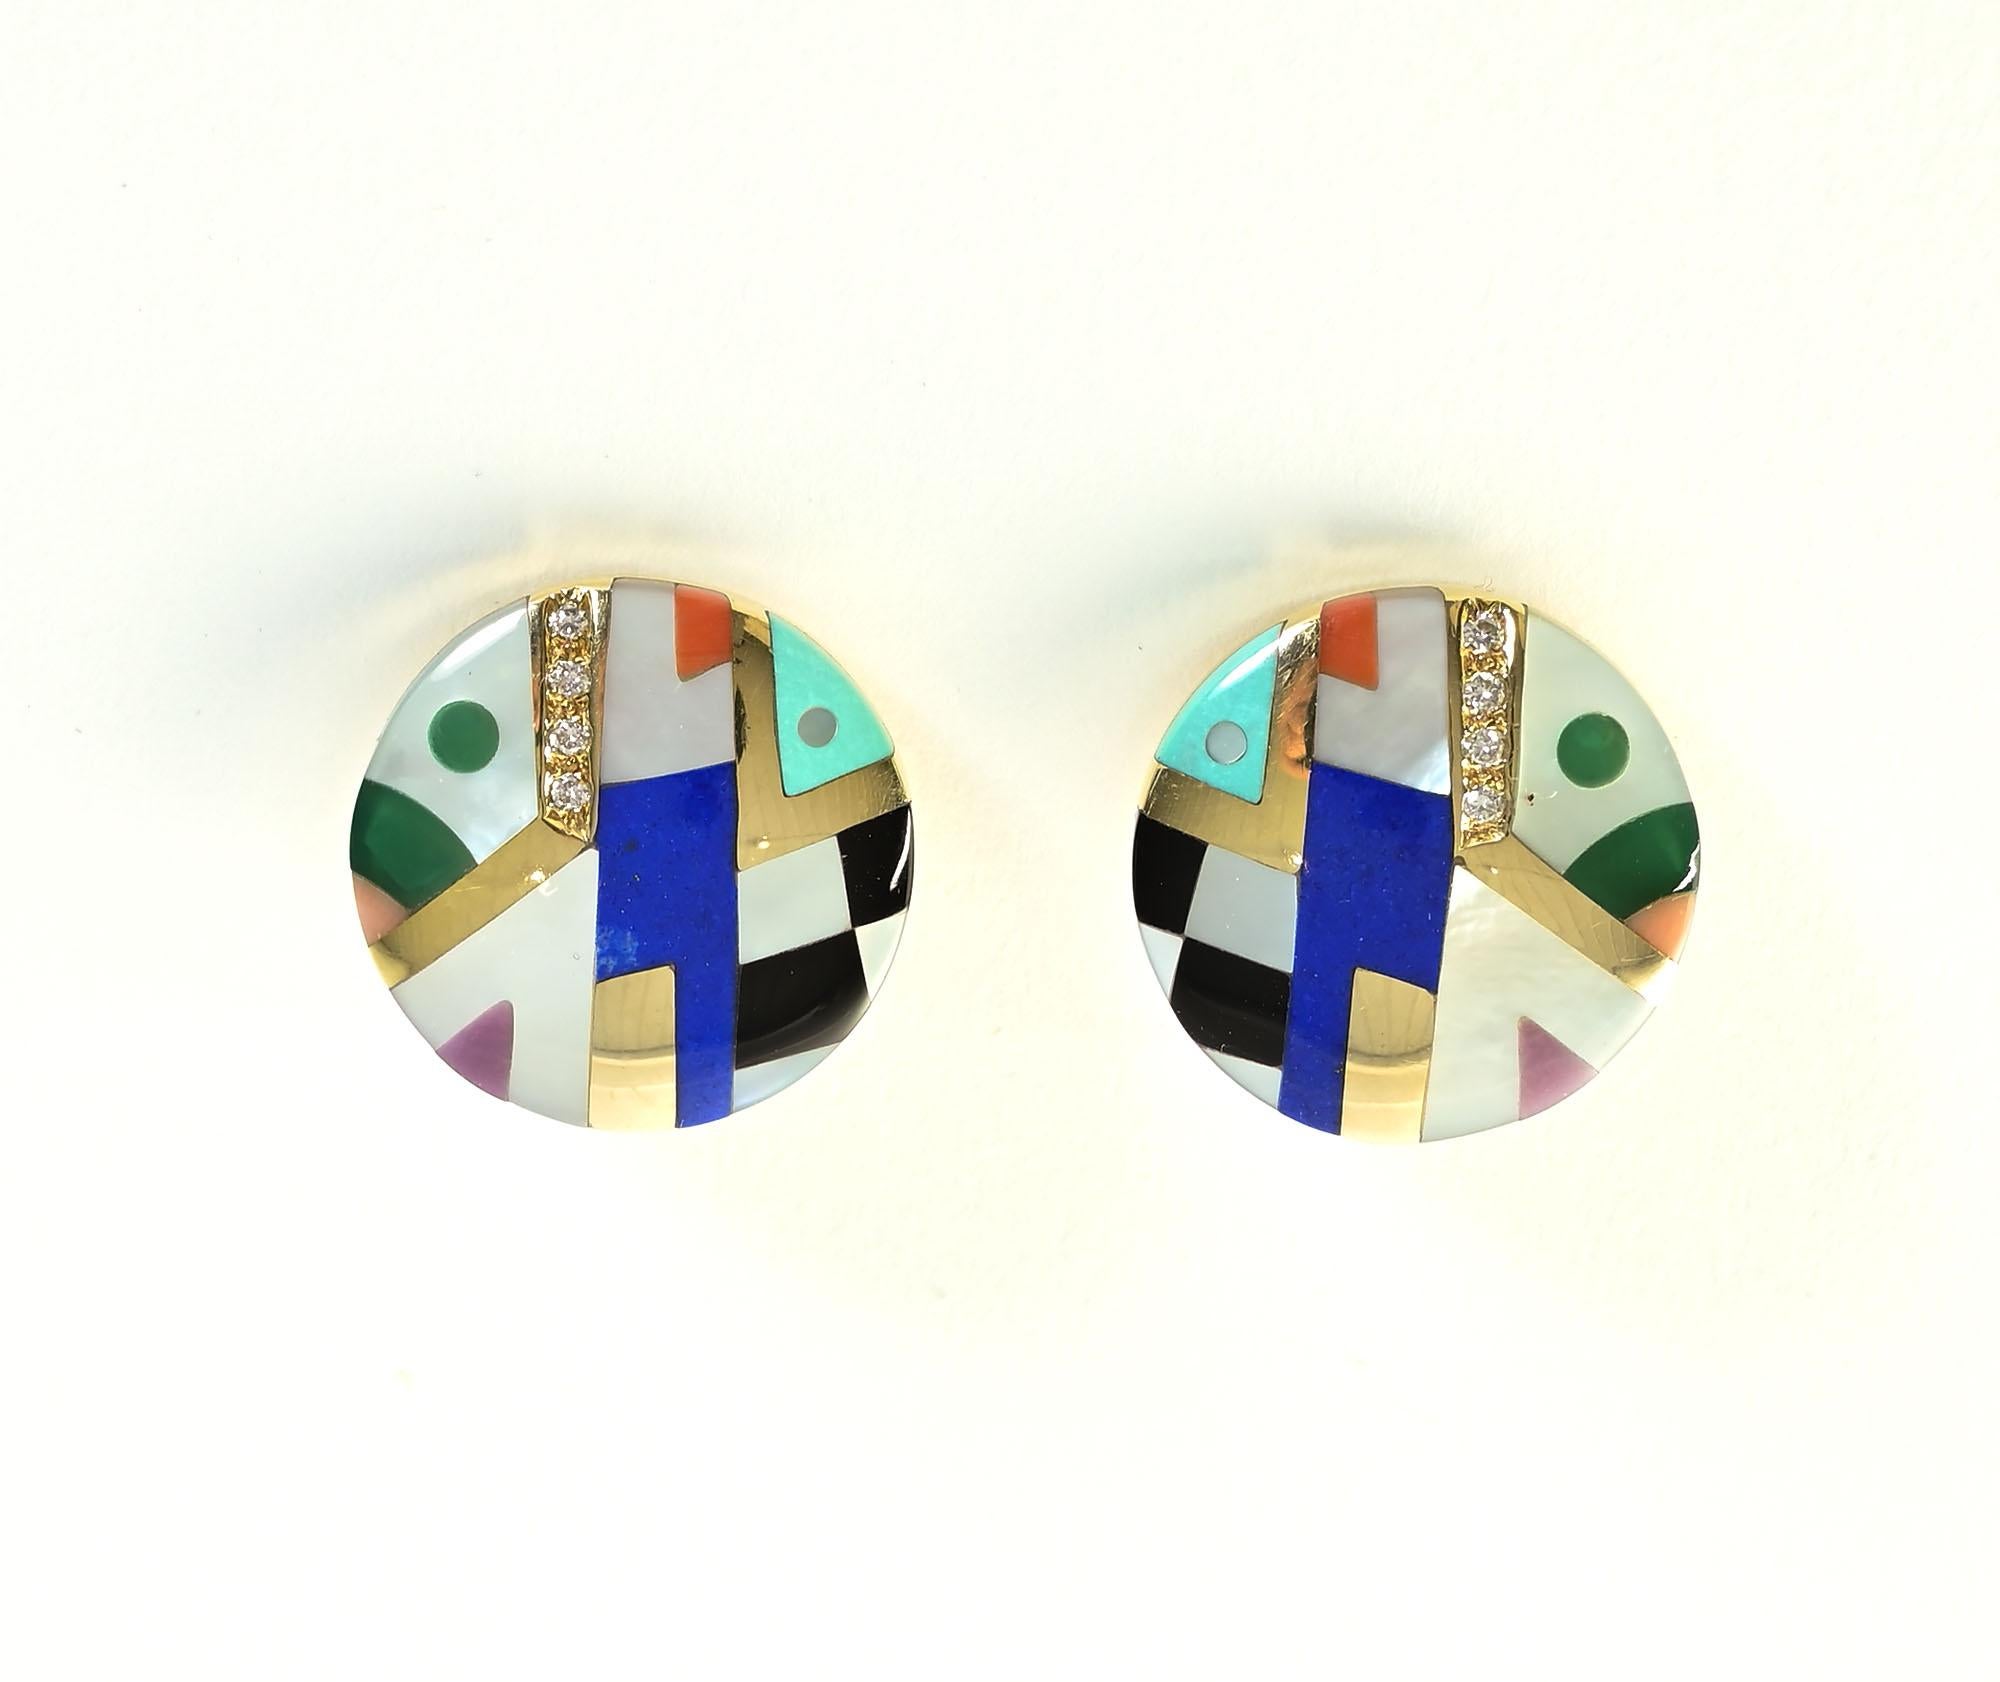 These earrings with a variety of inlaid stones are typical of the designs of American designers, Asch Grossbardt. Among the stones with which the 14 karat round earrings are inset are: black onyx; lapis lazuli;  sugilite and diamonds. Round and hard